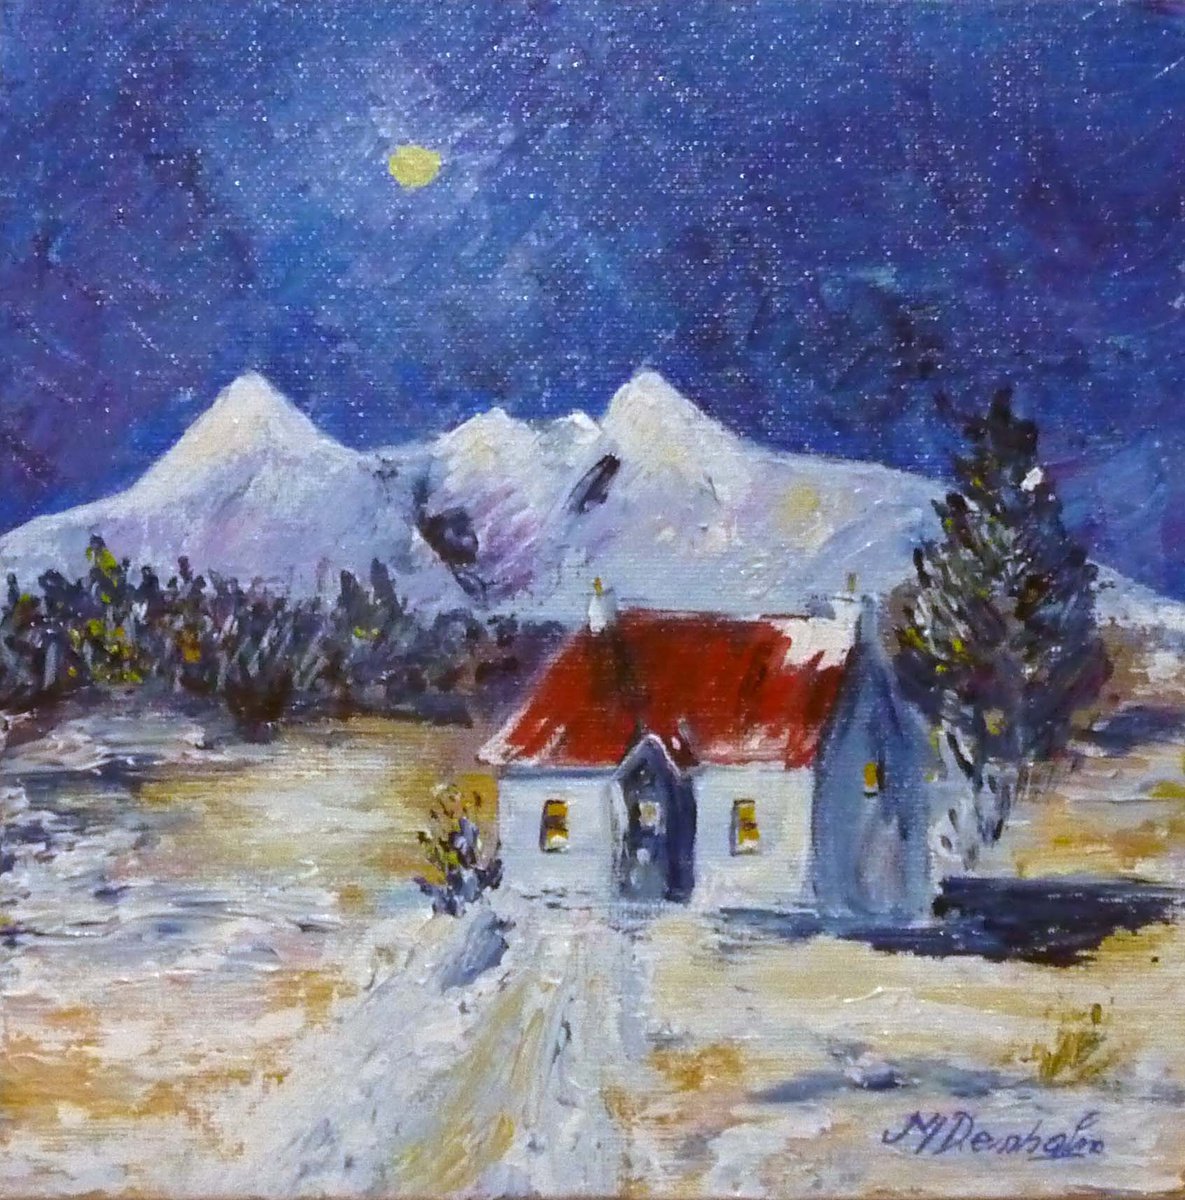 Winter at the Foot of the Mountains - An original landscape - FREE FRAME by Margaret Denholm